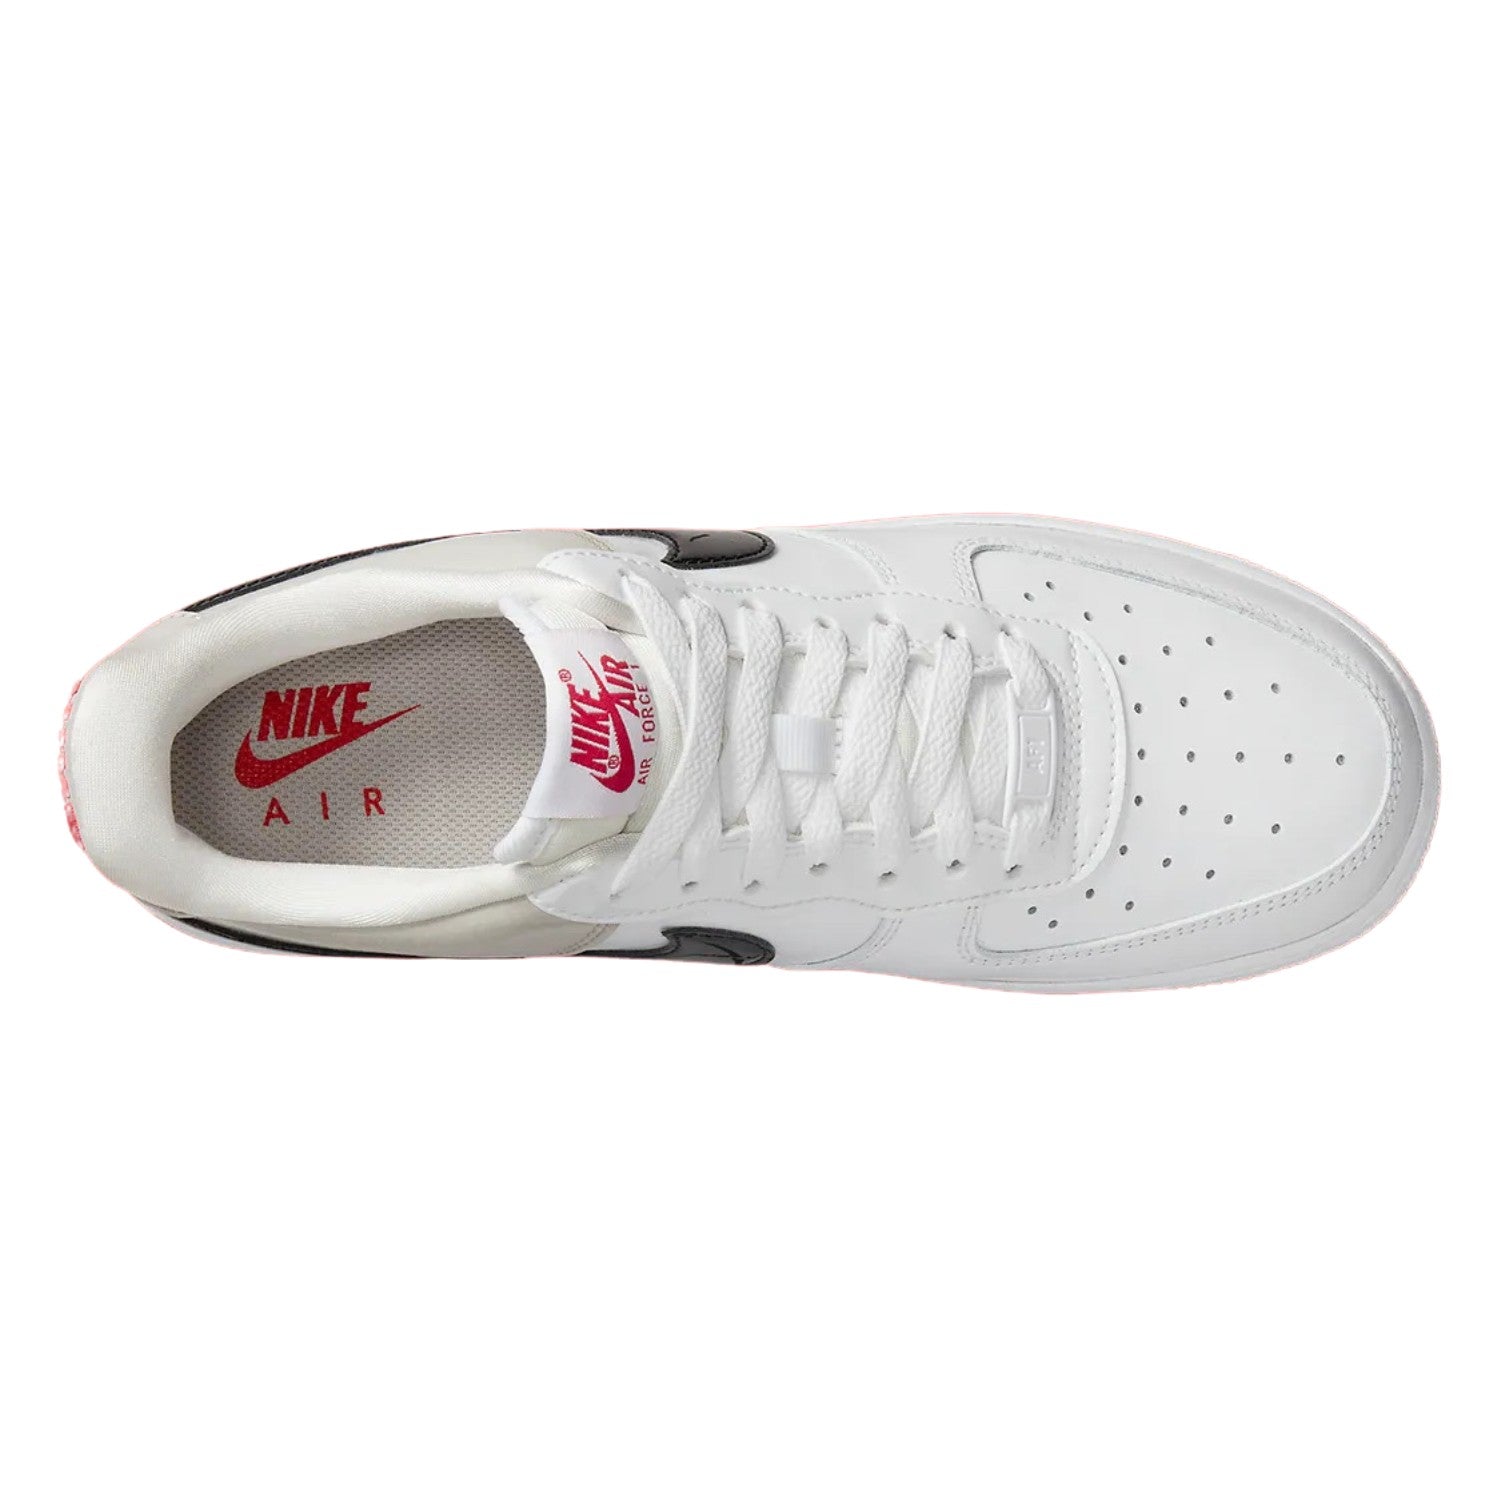 Nike Air Force 1 '07 Ess Snkr Womens Style : Dq7570-001